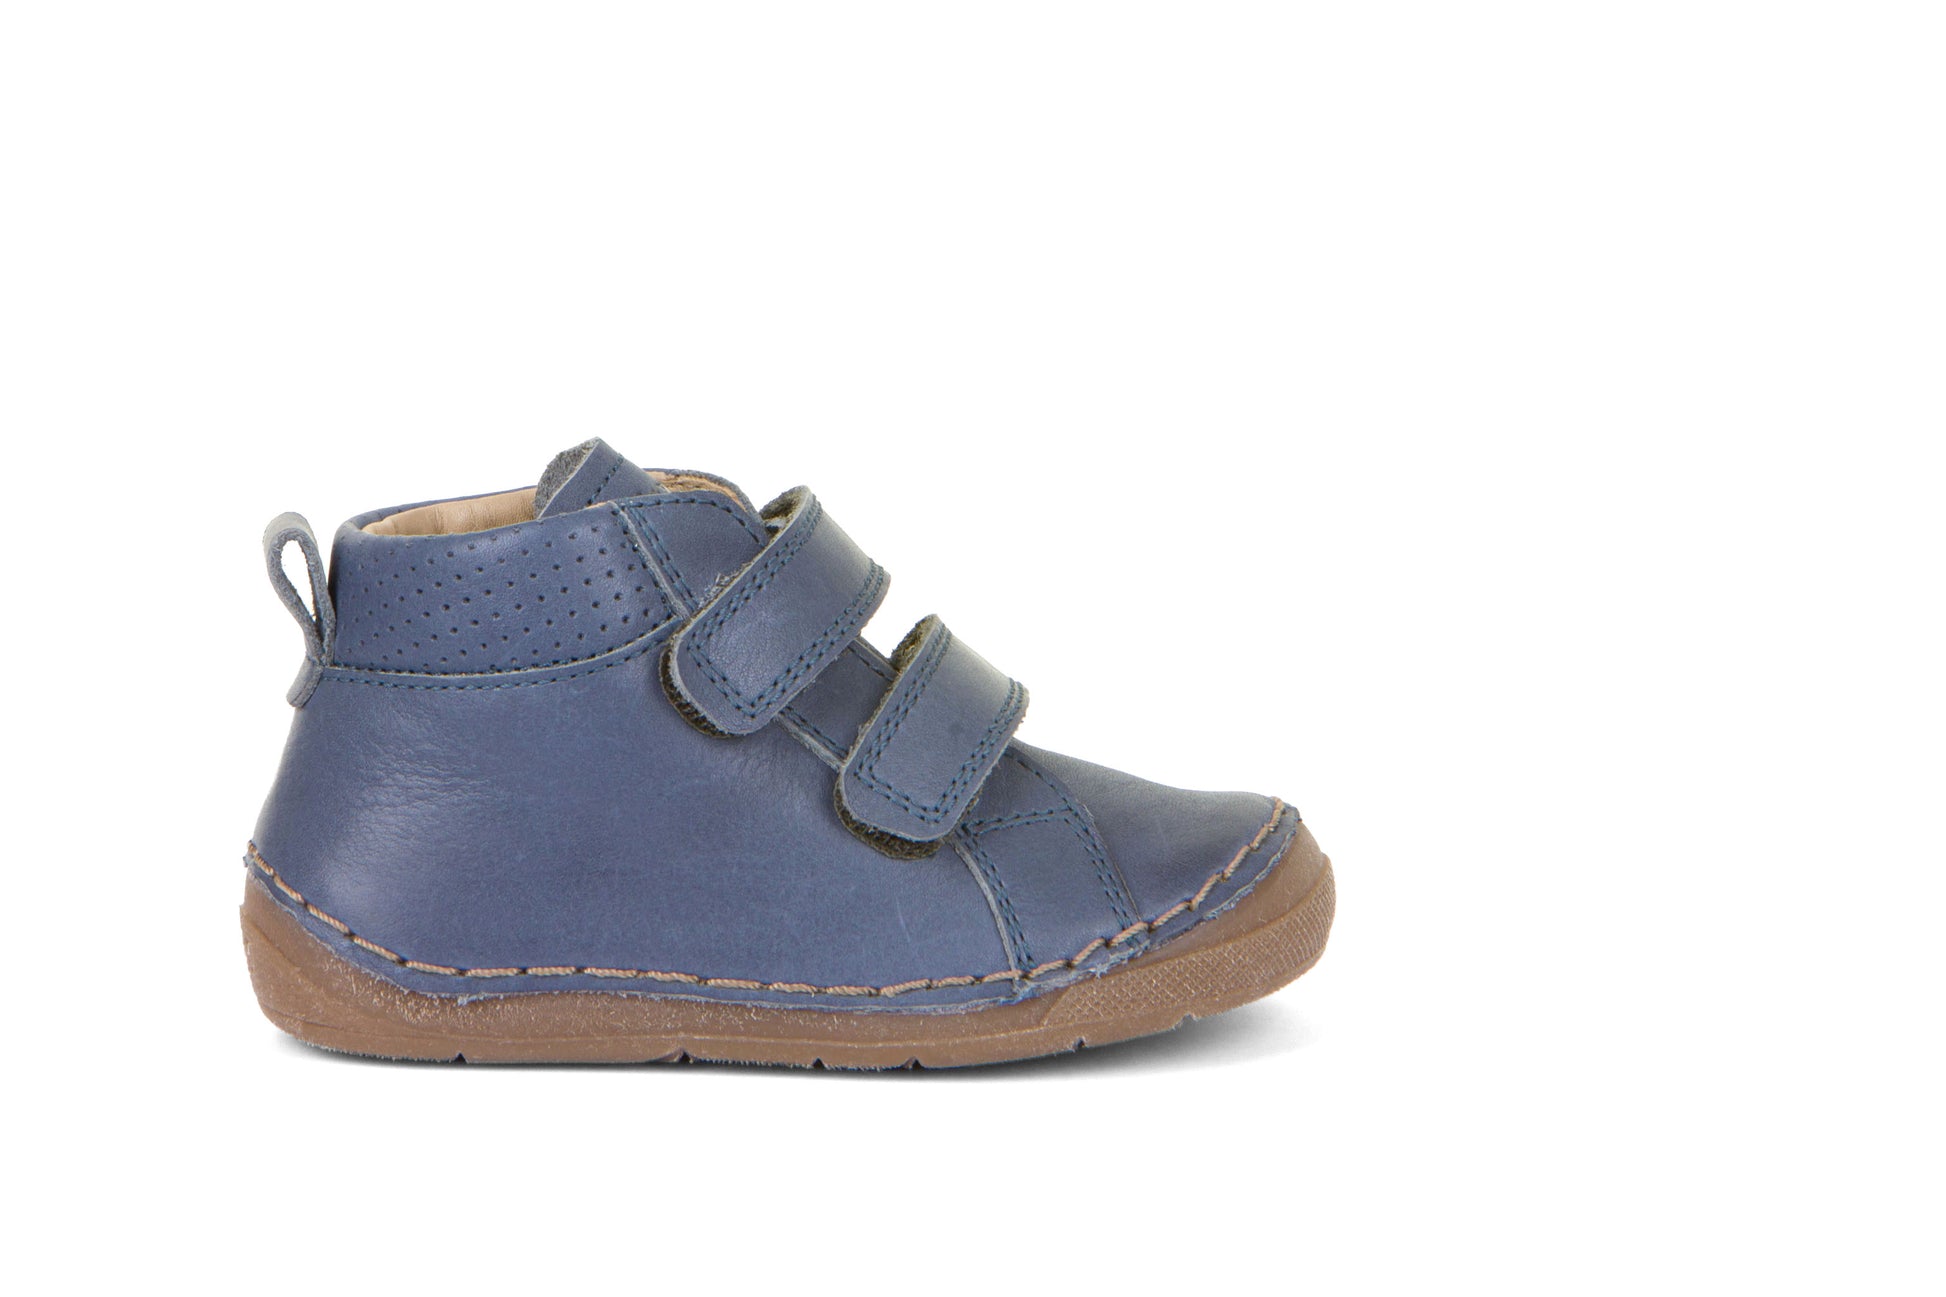 A boys boot by Froddo, style Paix Velcro G2130268-1 in Denim with double velcro fastening. Right side view.